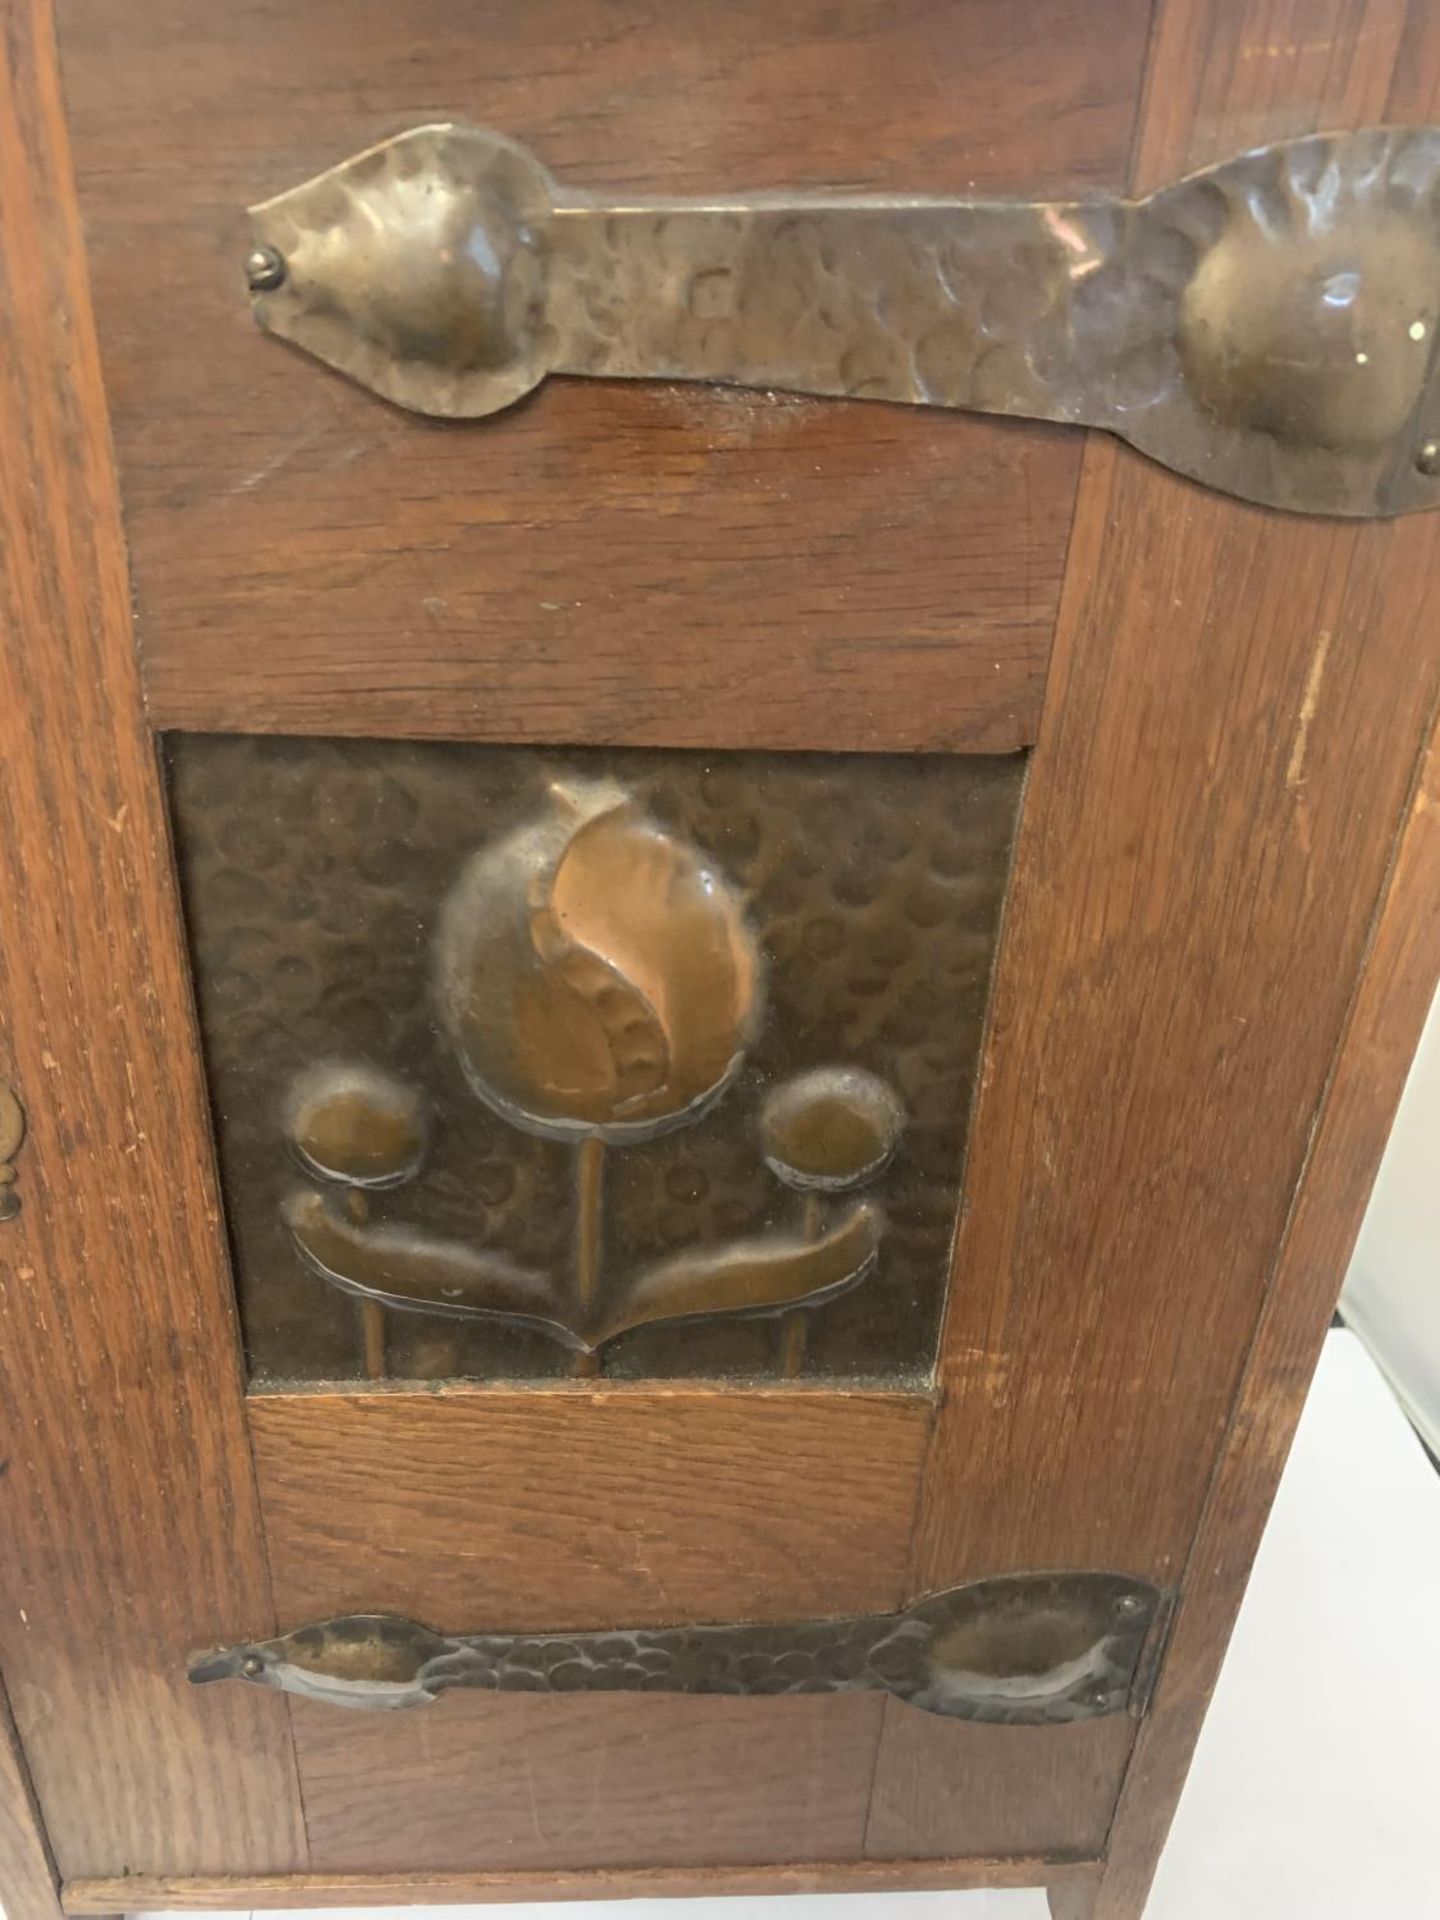 AN ARTS AND CRAFTS CABINET WITH COPPER HINGES AND DECORATIVE PANEL (LOCKED WITH NO KEY) - Image 2 of 3